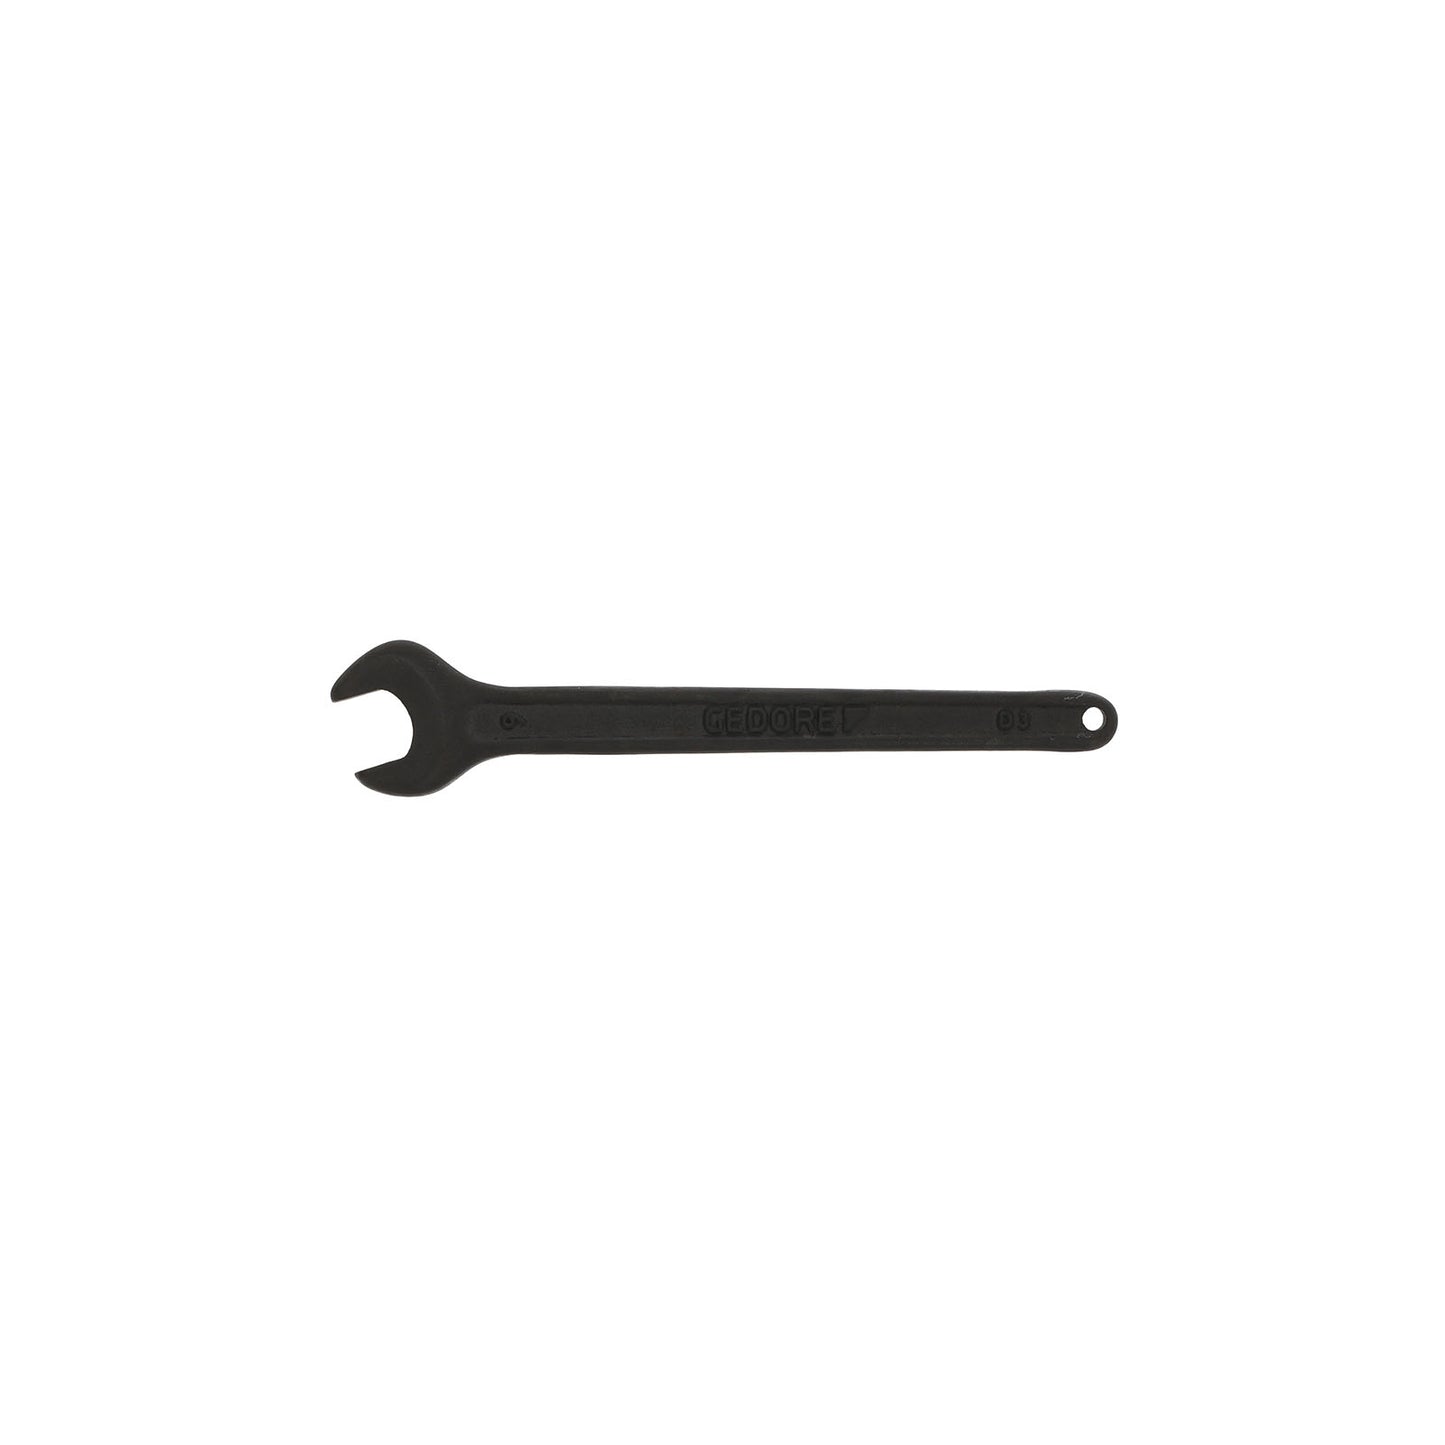 GEDORE 894 9 - 1 Open End Wrench, 9mm (6573950)